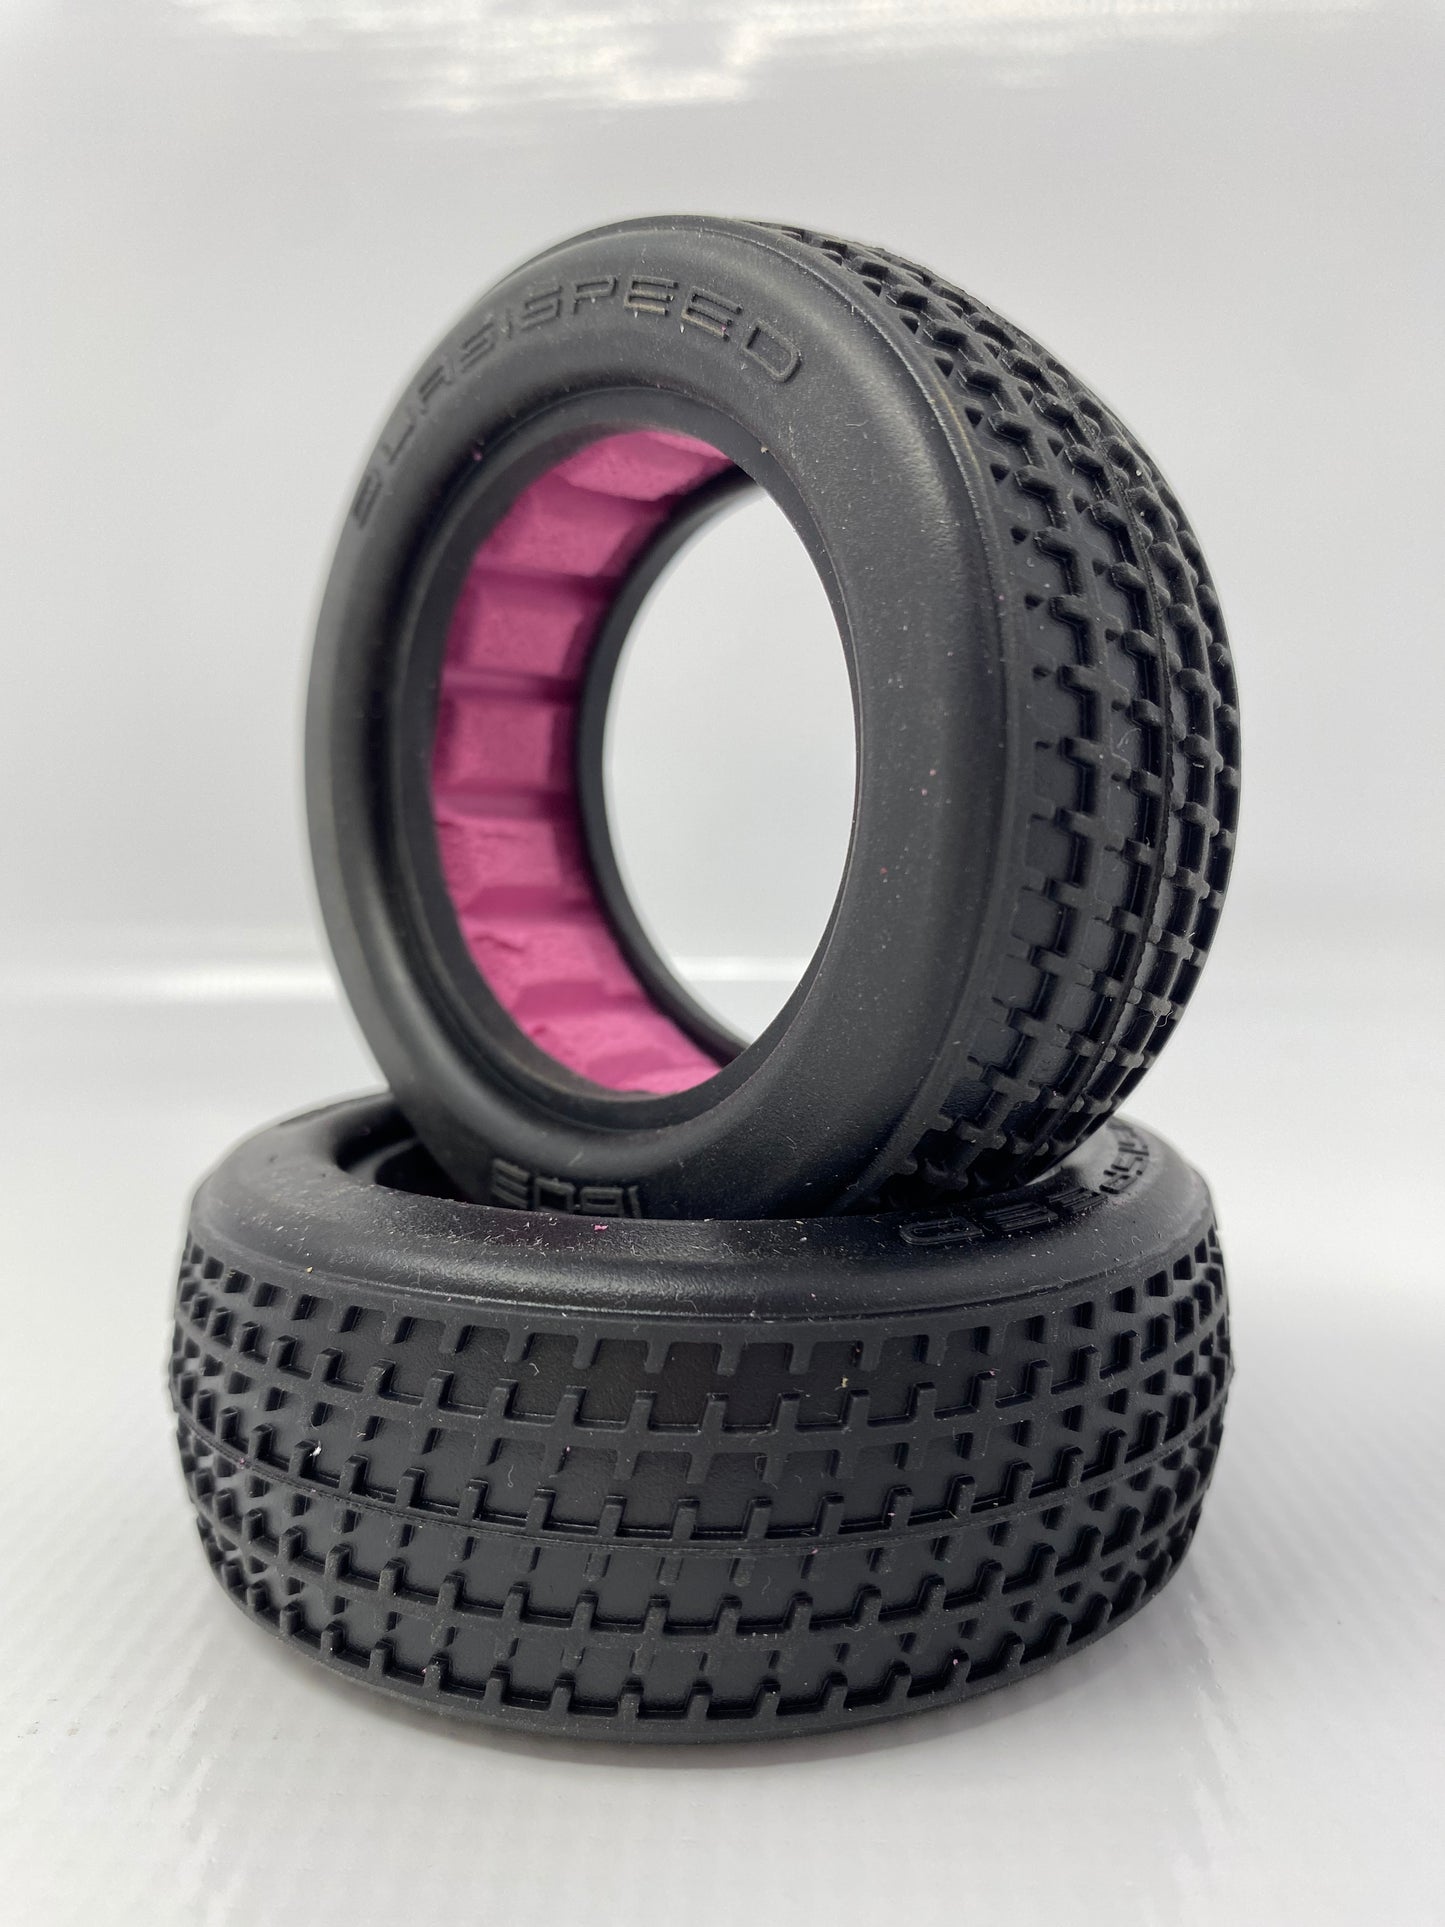 QuasiSpeed Rubber Front Tires with Inserts (2) QS-1601